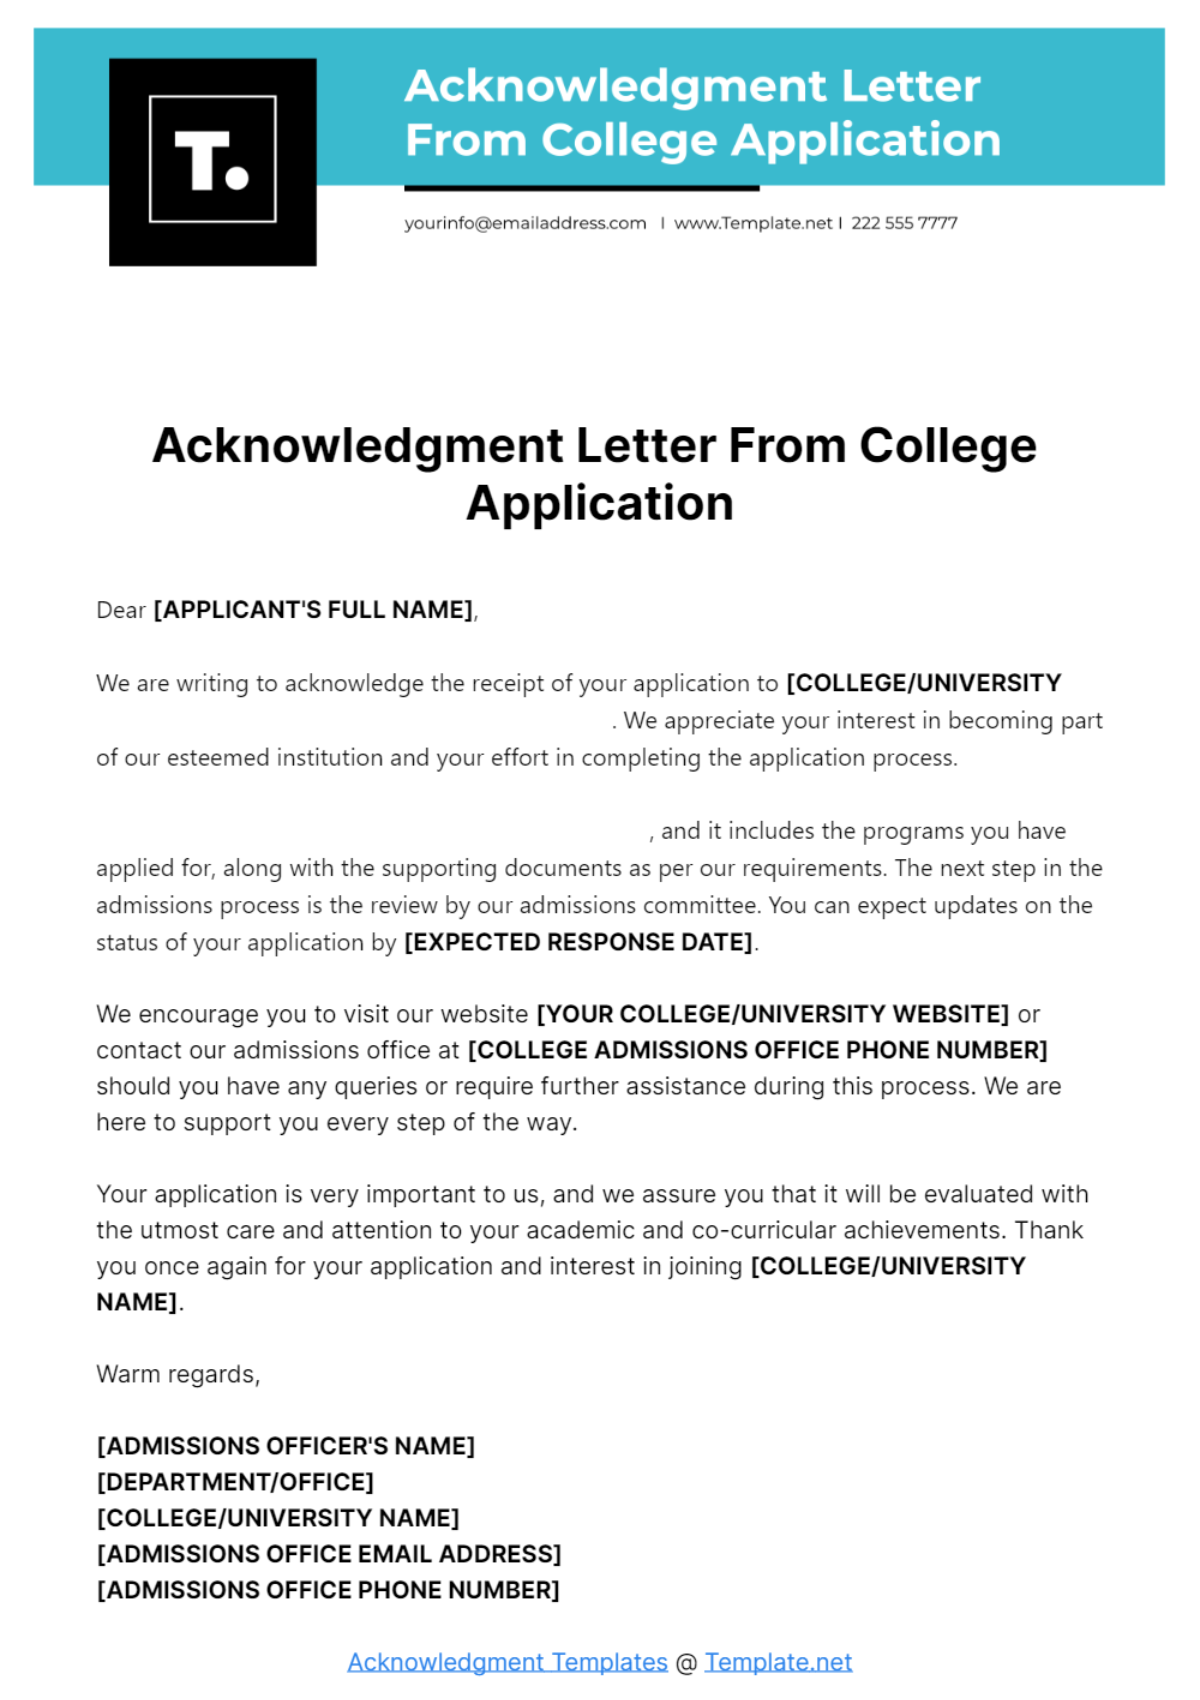 Acknowledgment Letter From College Application Template